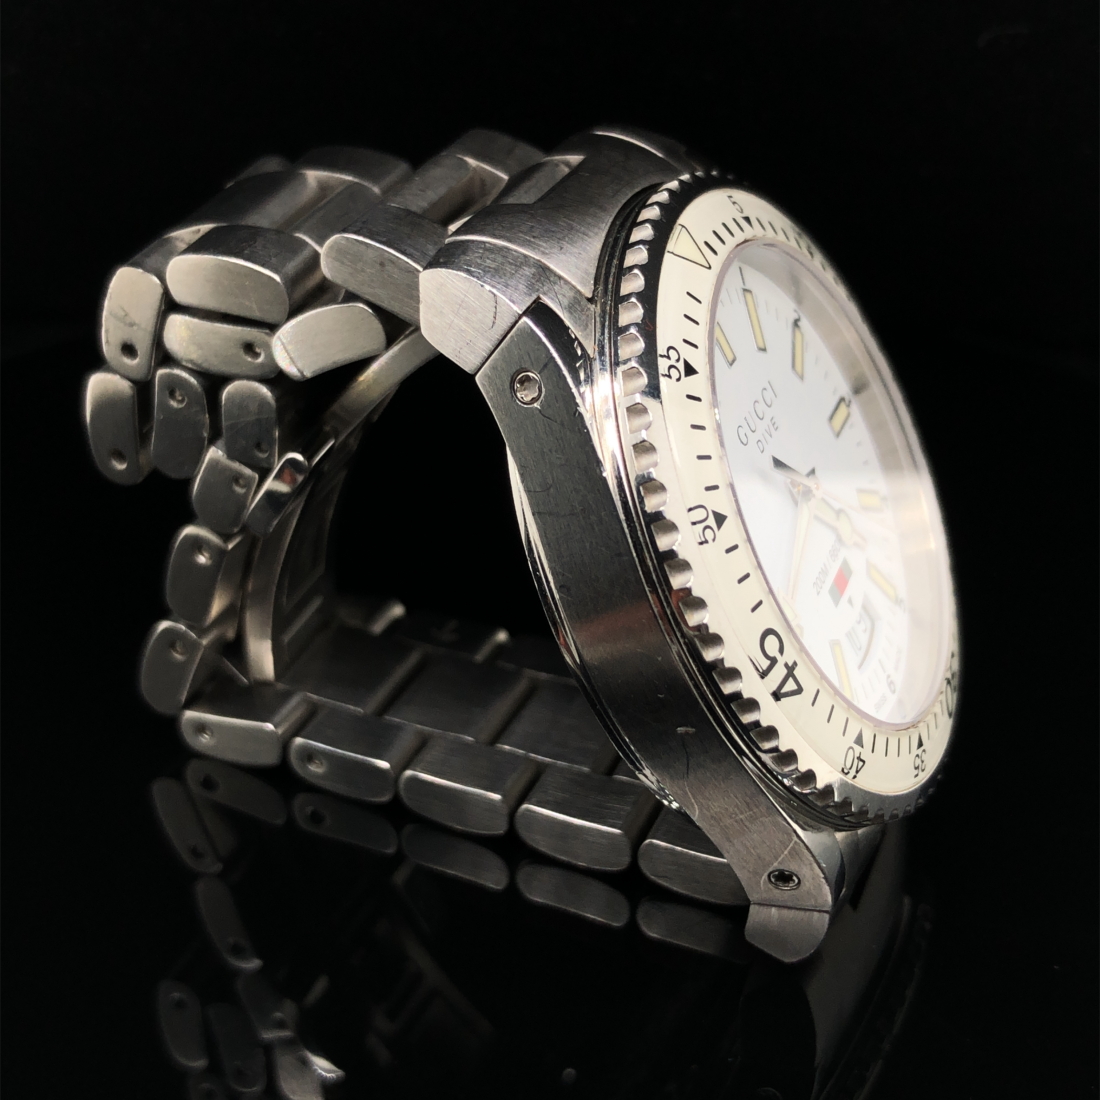 A GUCCI DIVE WATCH, WHITE DIAL AND BATONS, ON A STAINLESS STEEL BRACELET STRAP WITH A BUTTERFLY - Image 3 of 6